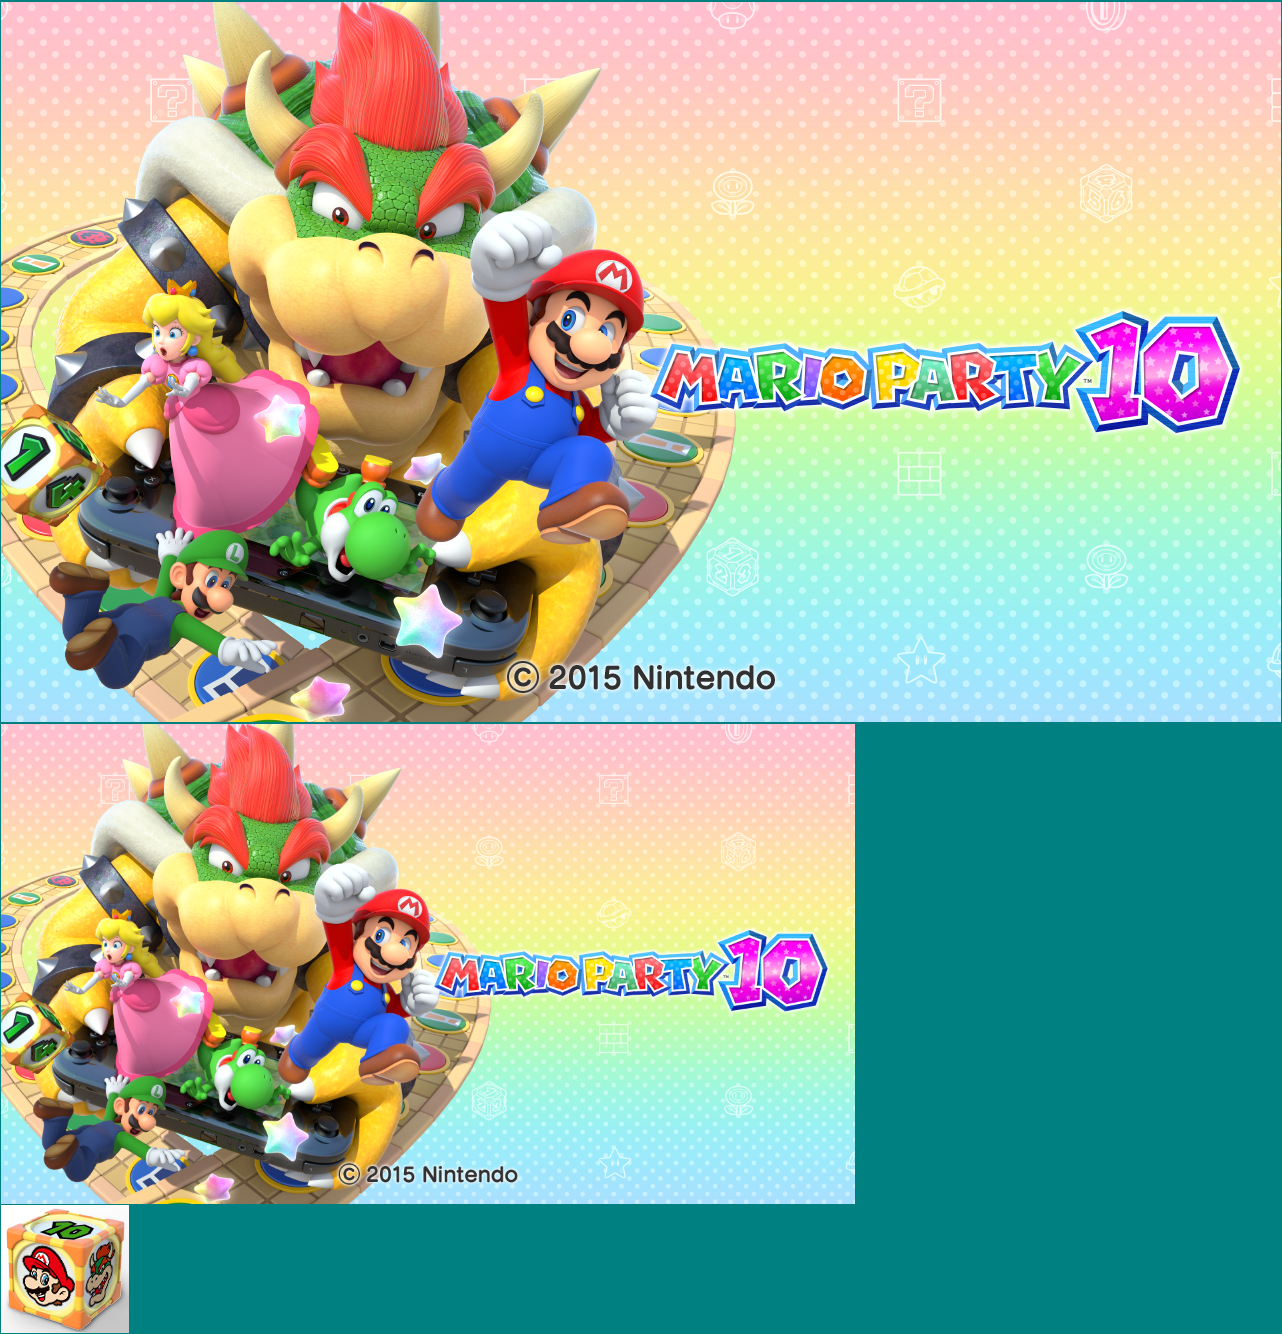 Mario Party 10 - Banners and HOME Menu Icon